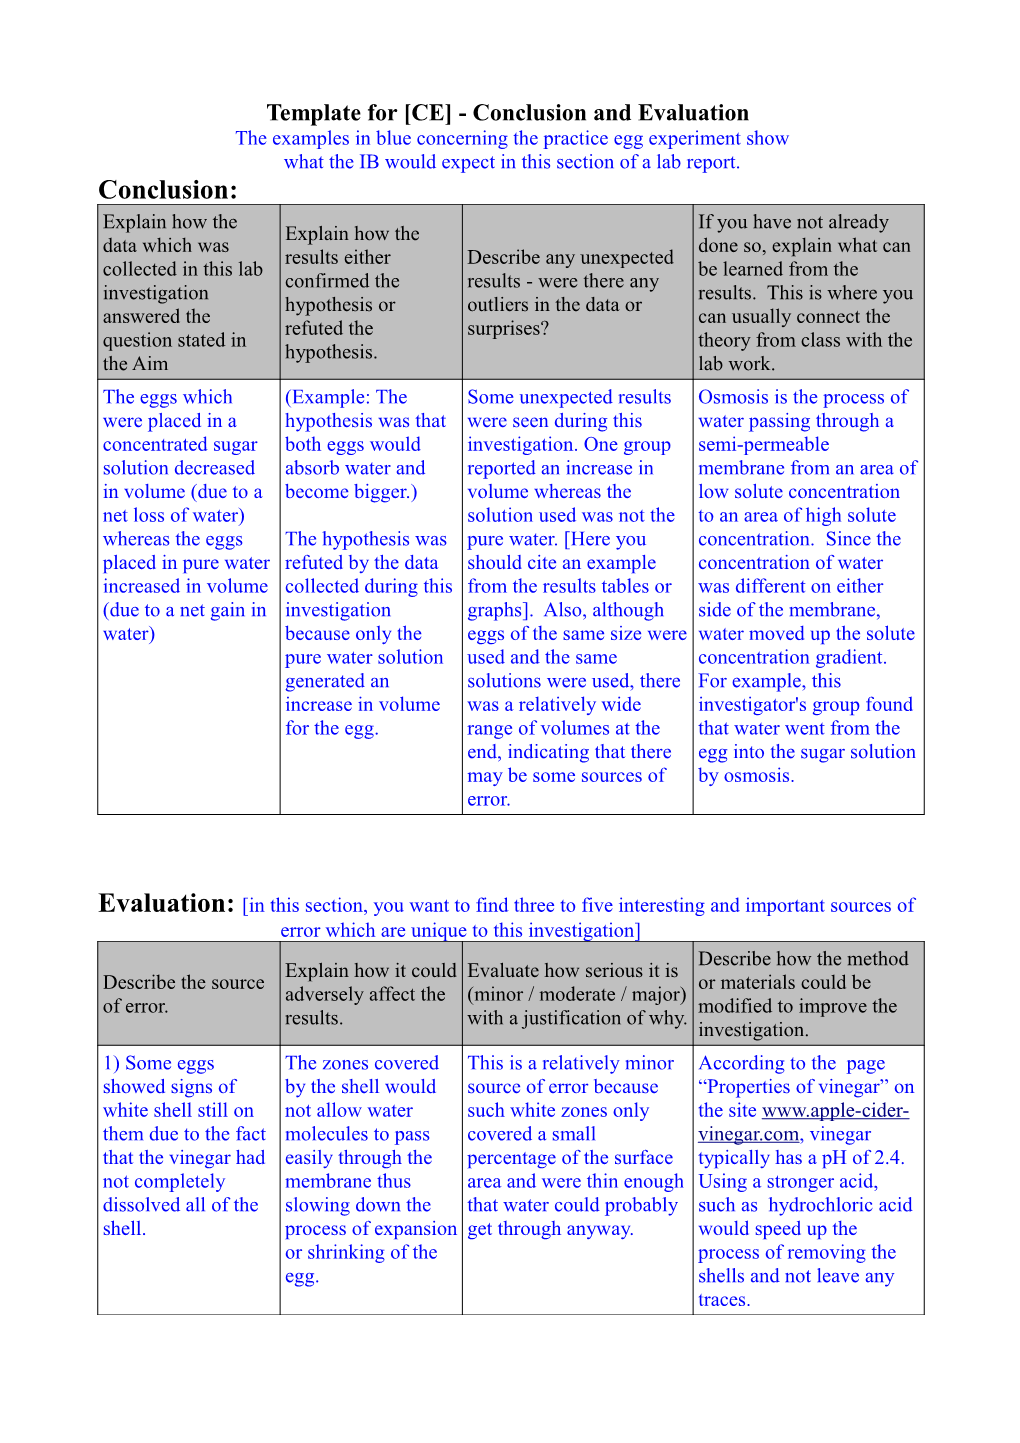 Template for CE - Conclusion and Evaluation